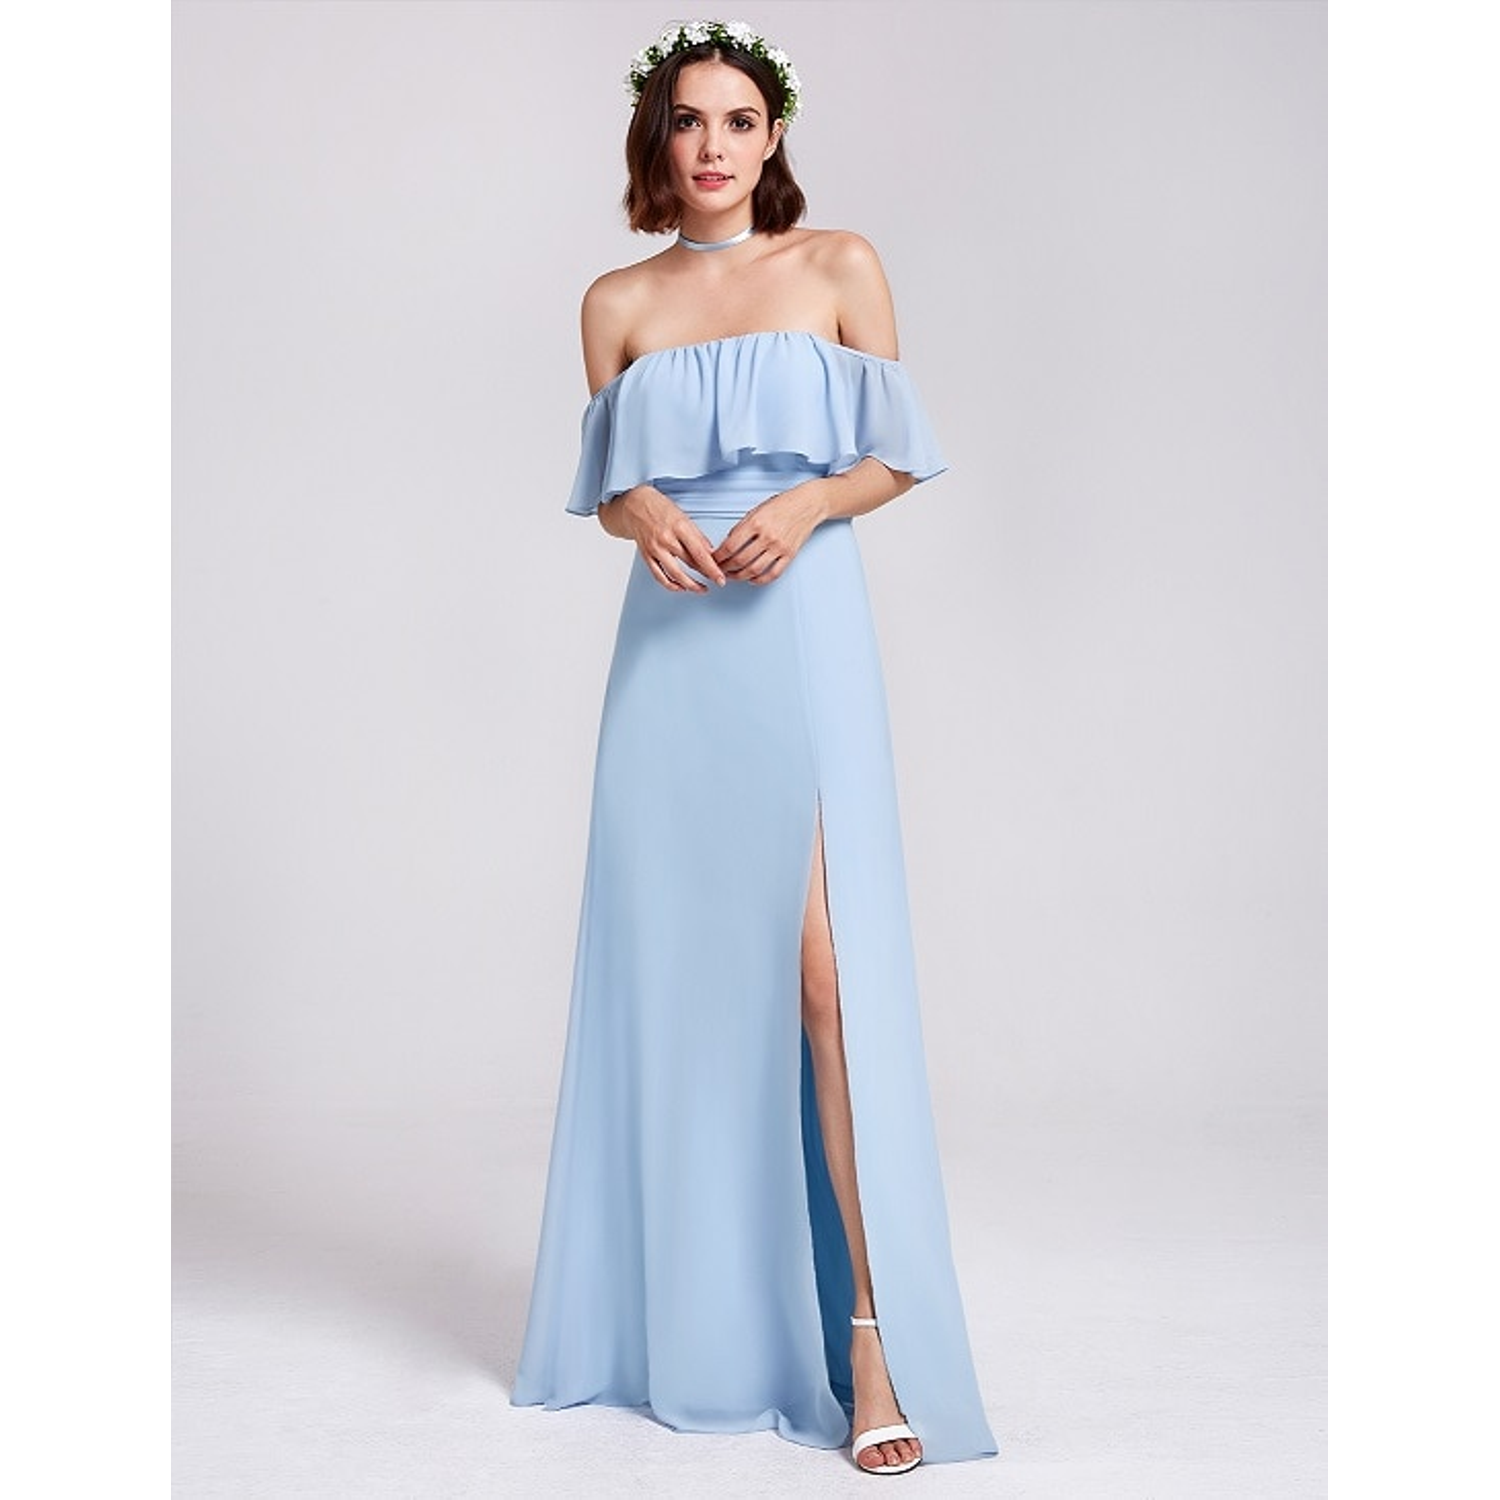 Bridesmaid dress with a slit